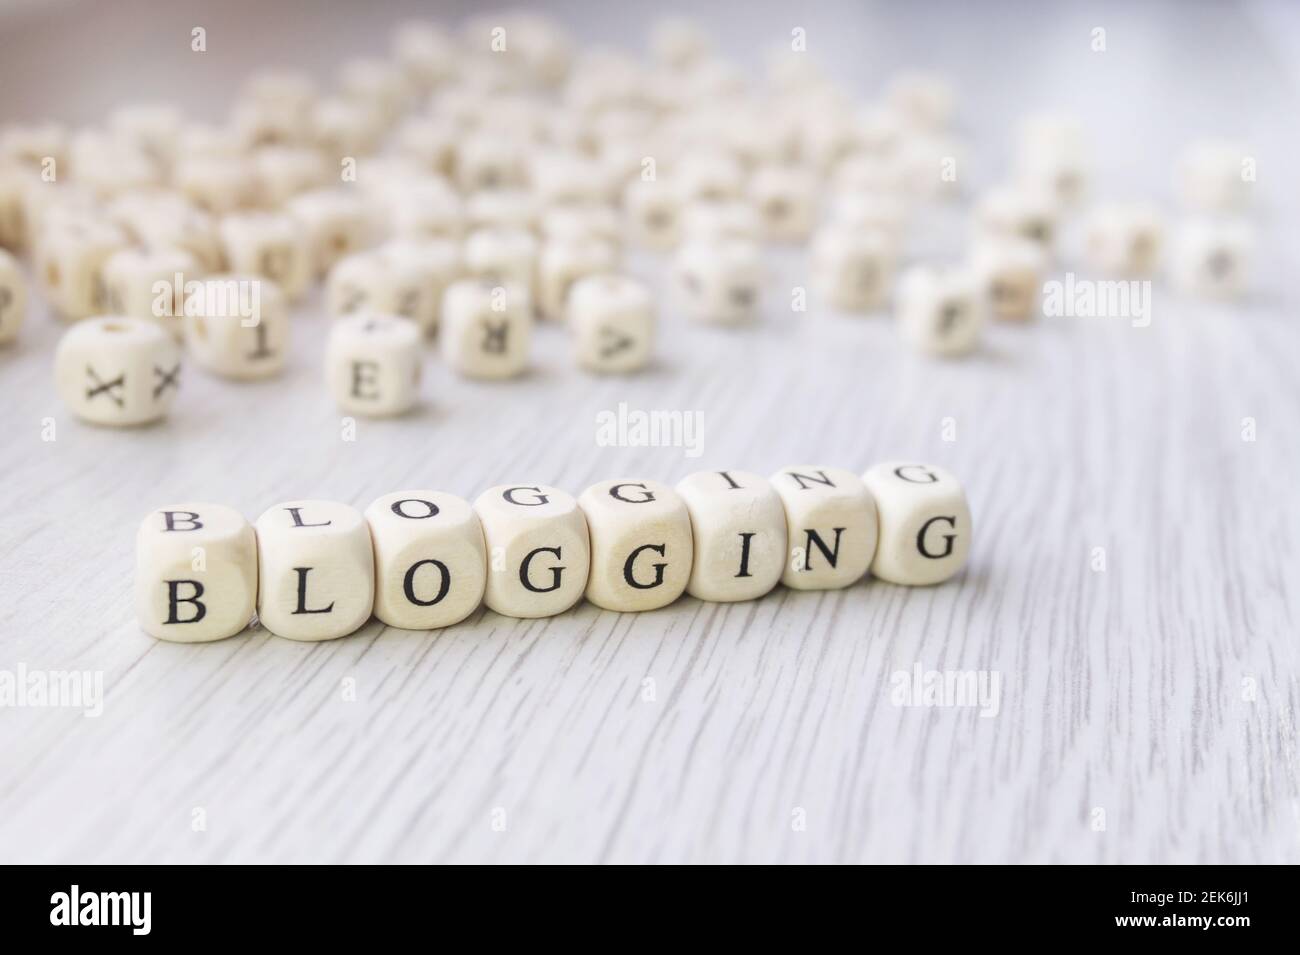 Word Blogging made with block wooden letters cubes Stock Photo